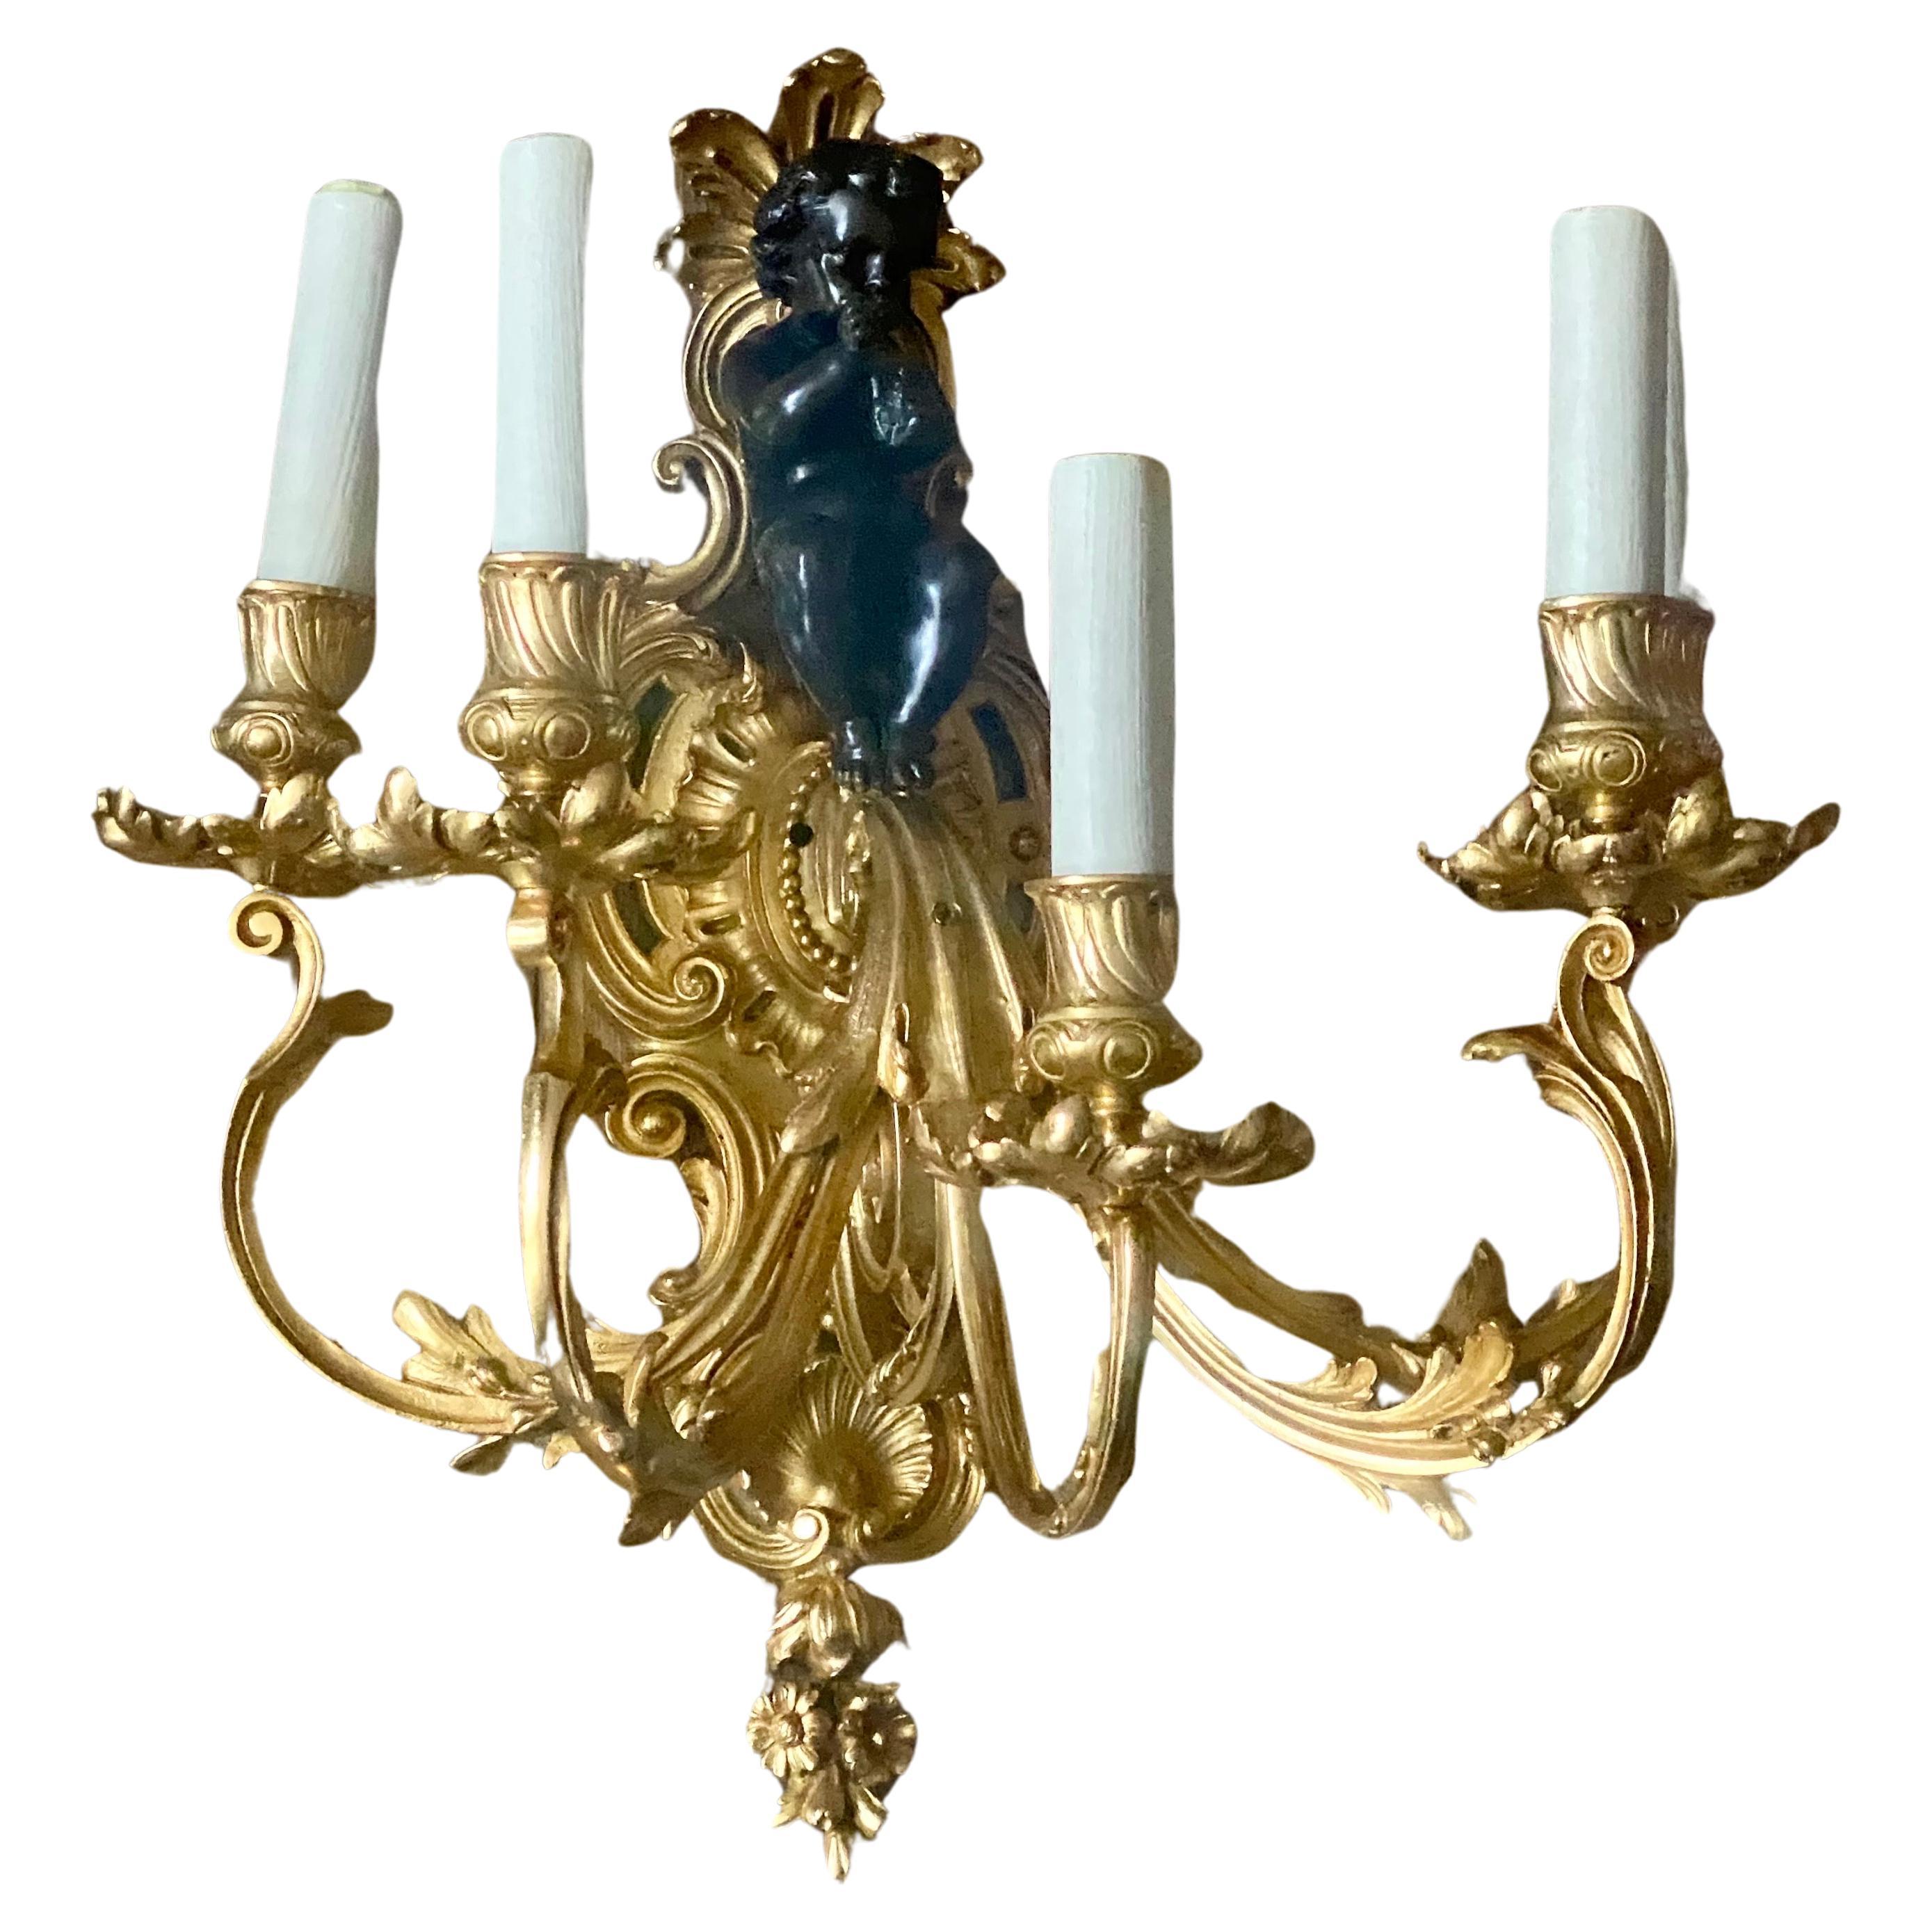 Late 19th Century A Large Pair of 19th Century French Gilt Bronze Dore Cherub Wall Sconces For Sale